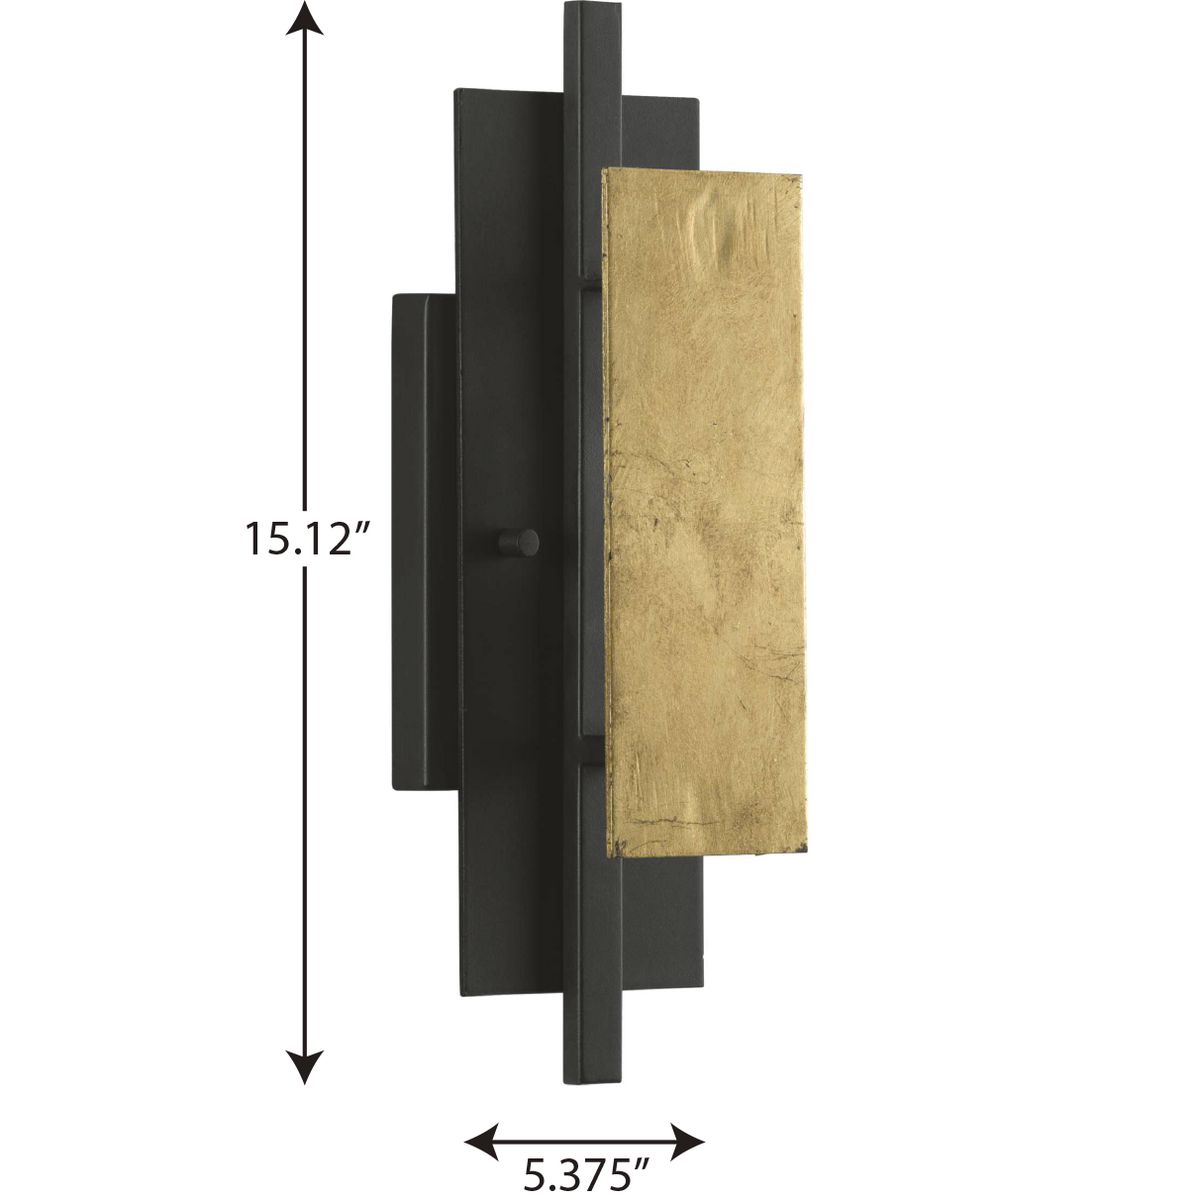 Lowery 1-Light Wall Sconce